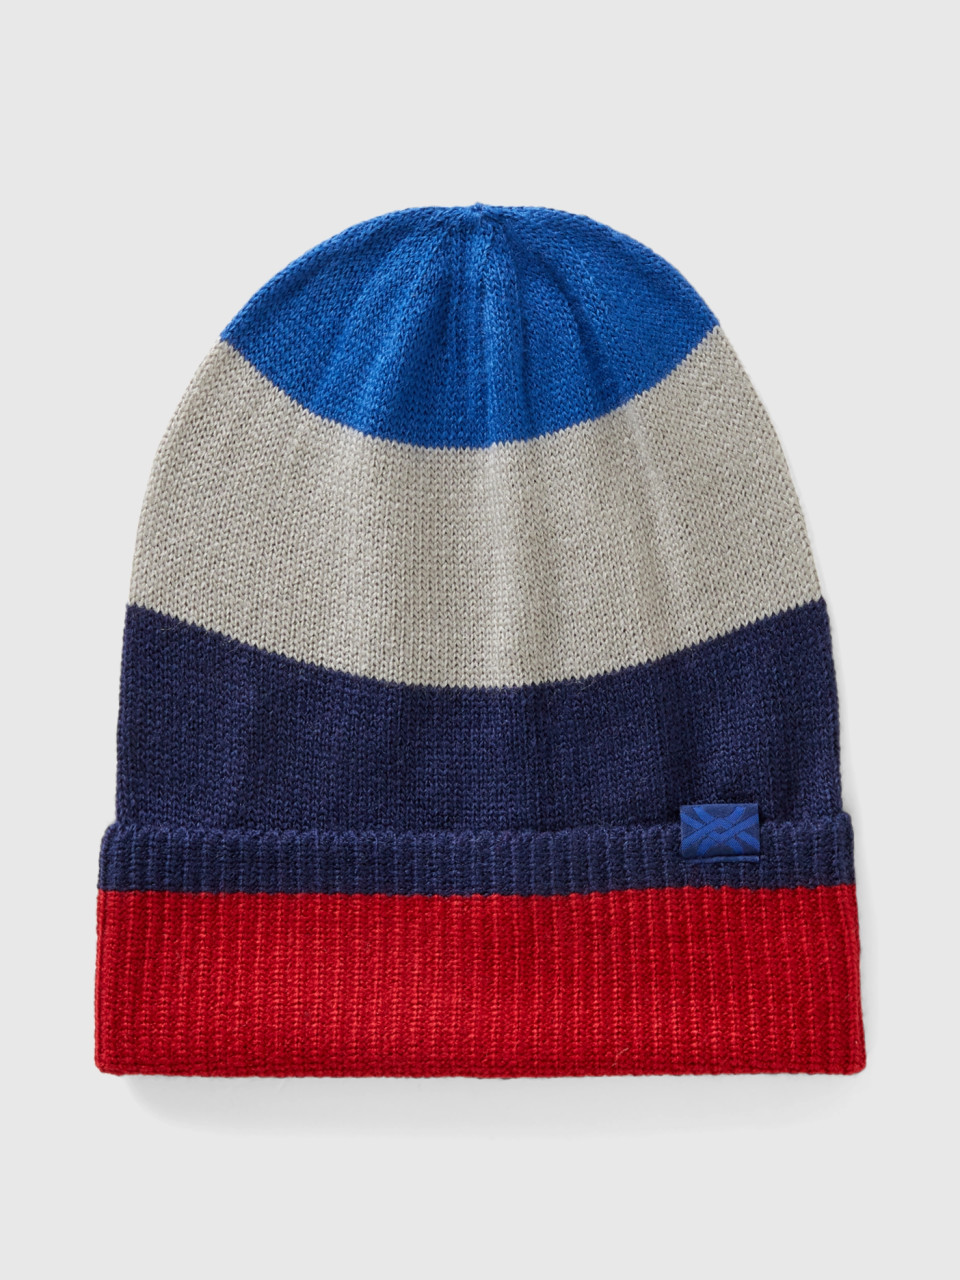 Benetton, Multicolor Striped Hat, Red, Kids